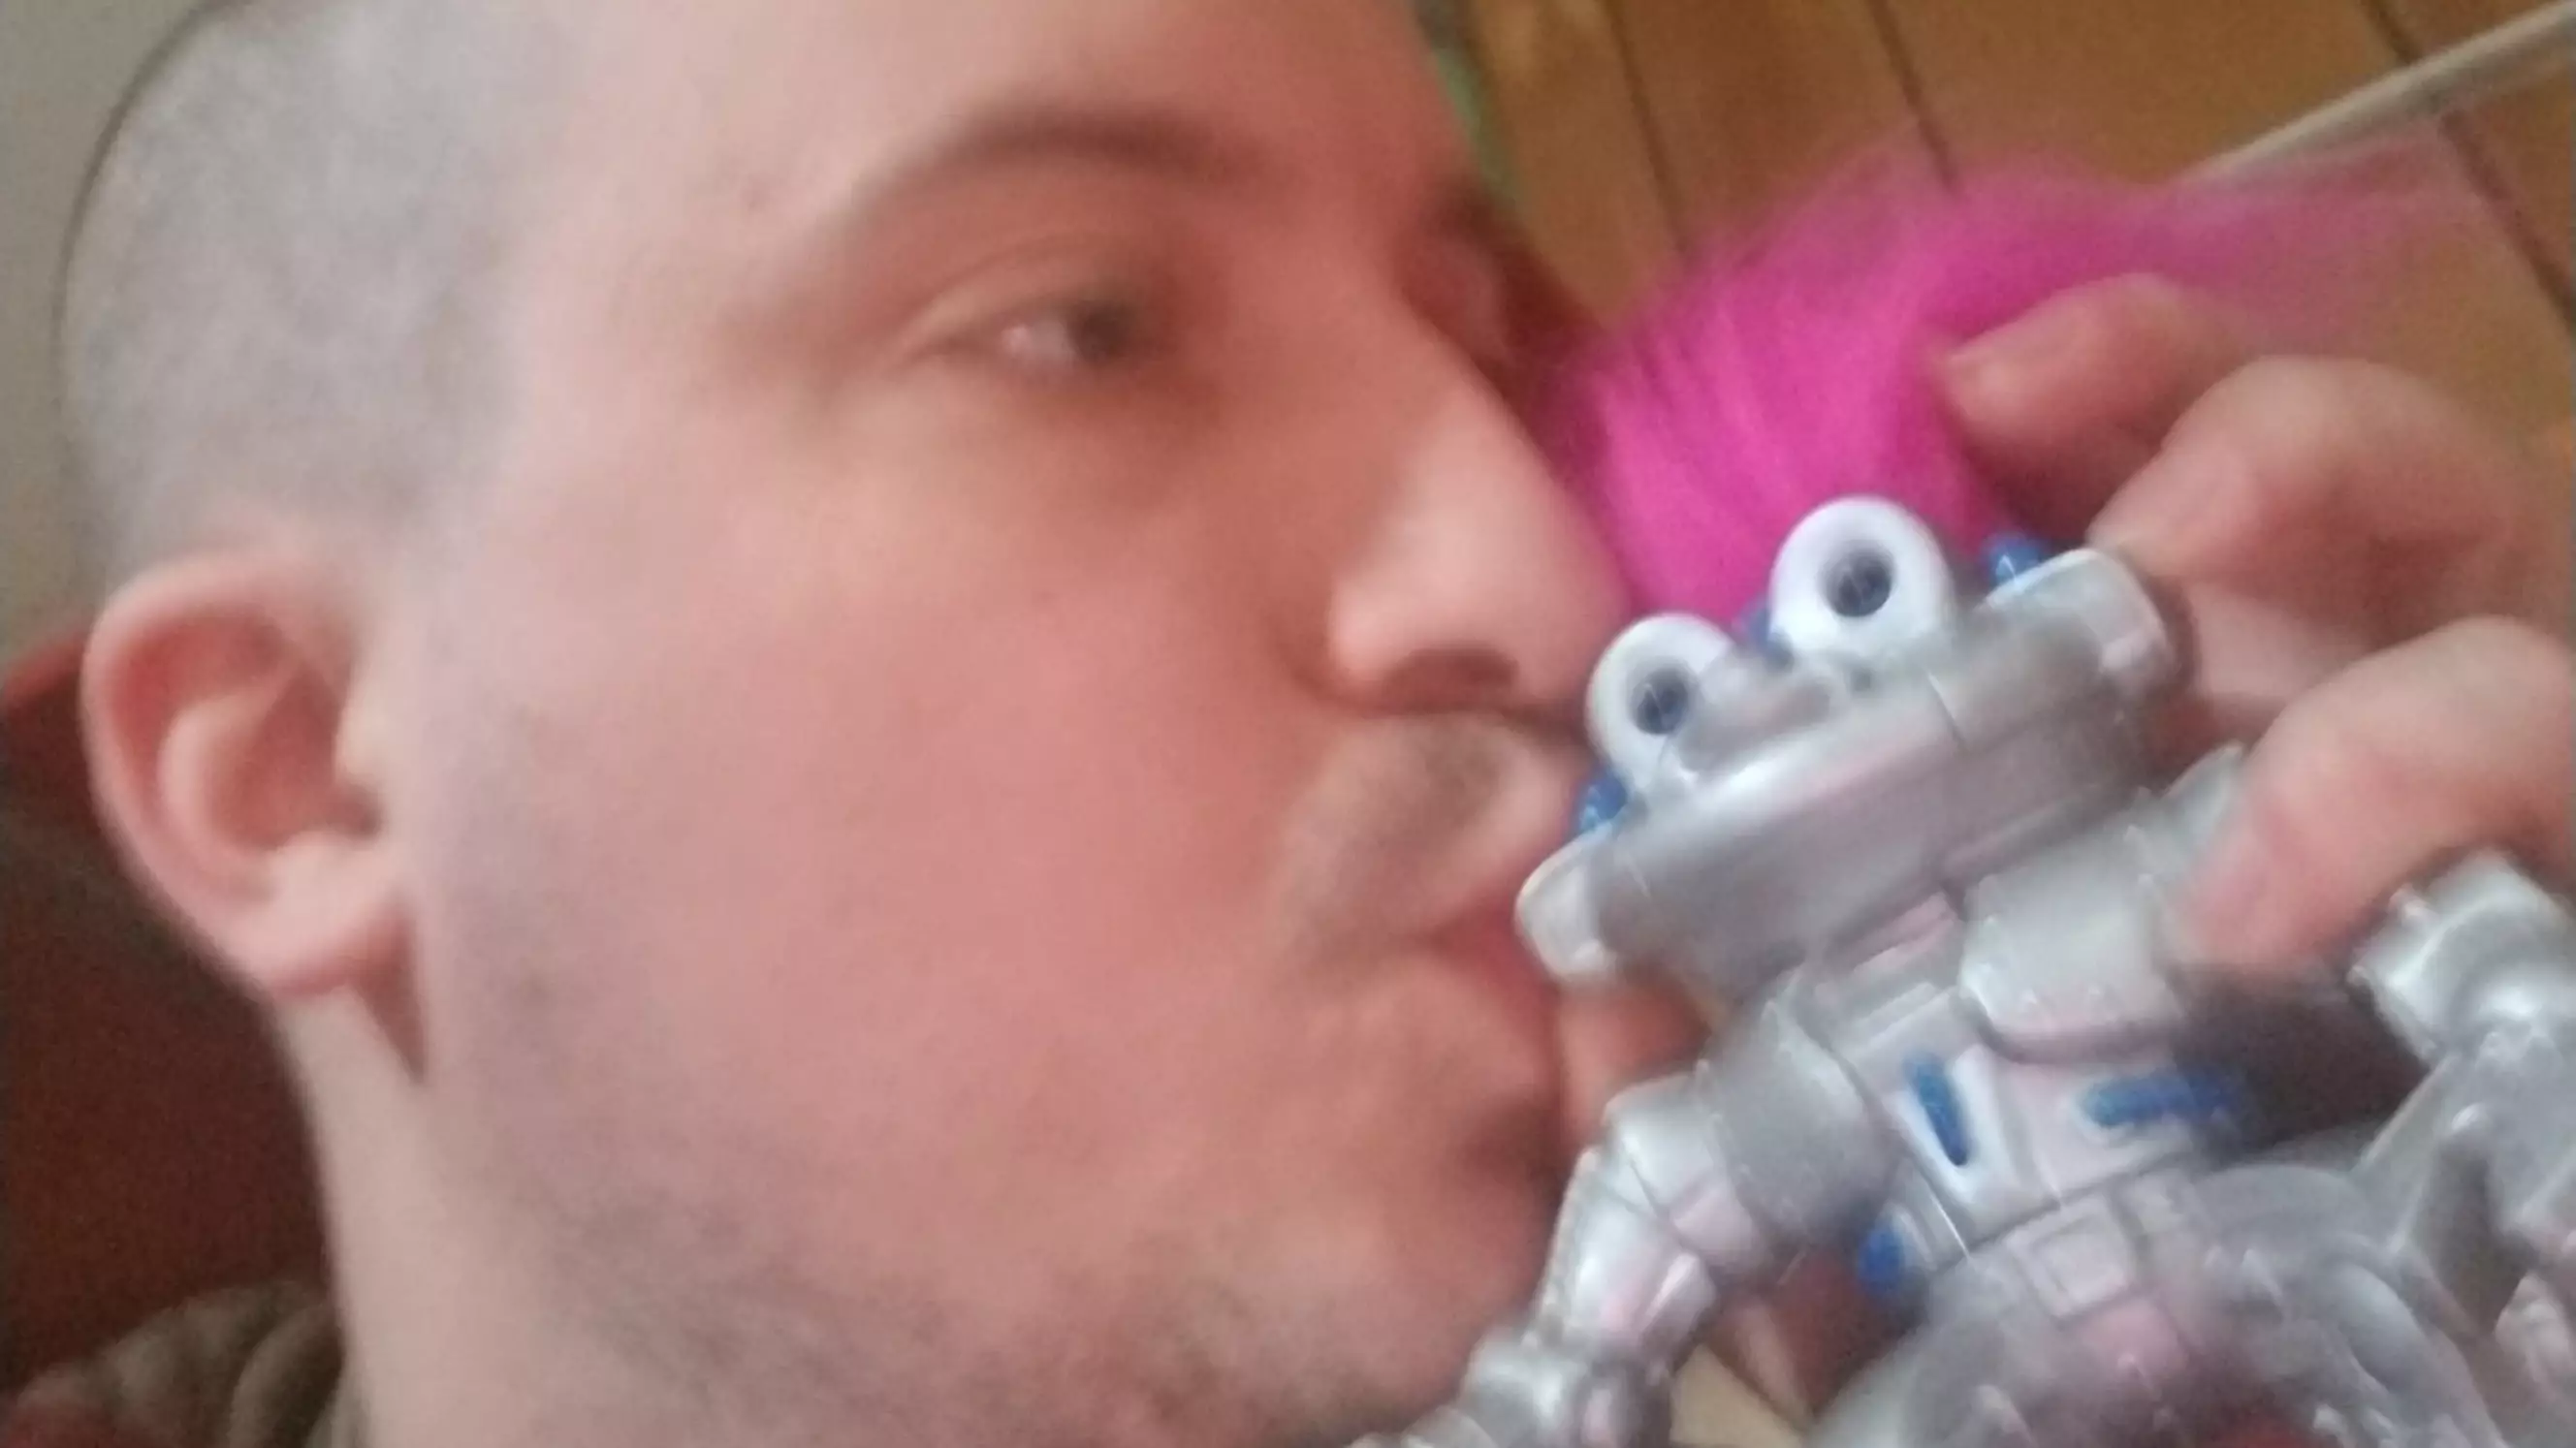 Man Speaks Out About Long-Term Relationship With 90s RoboTroll Doll